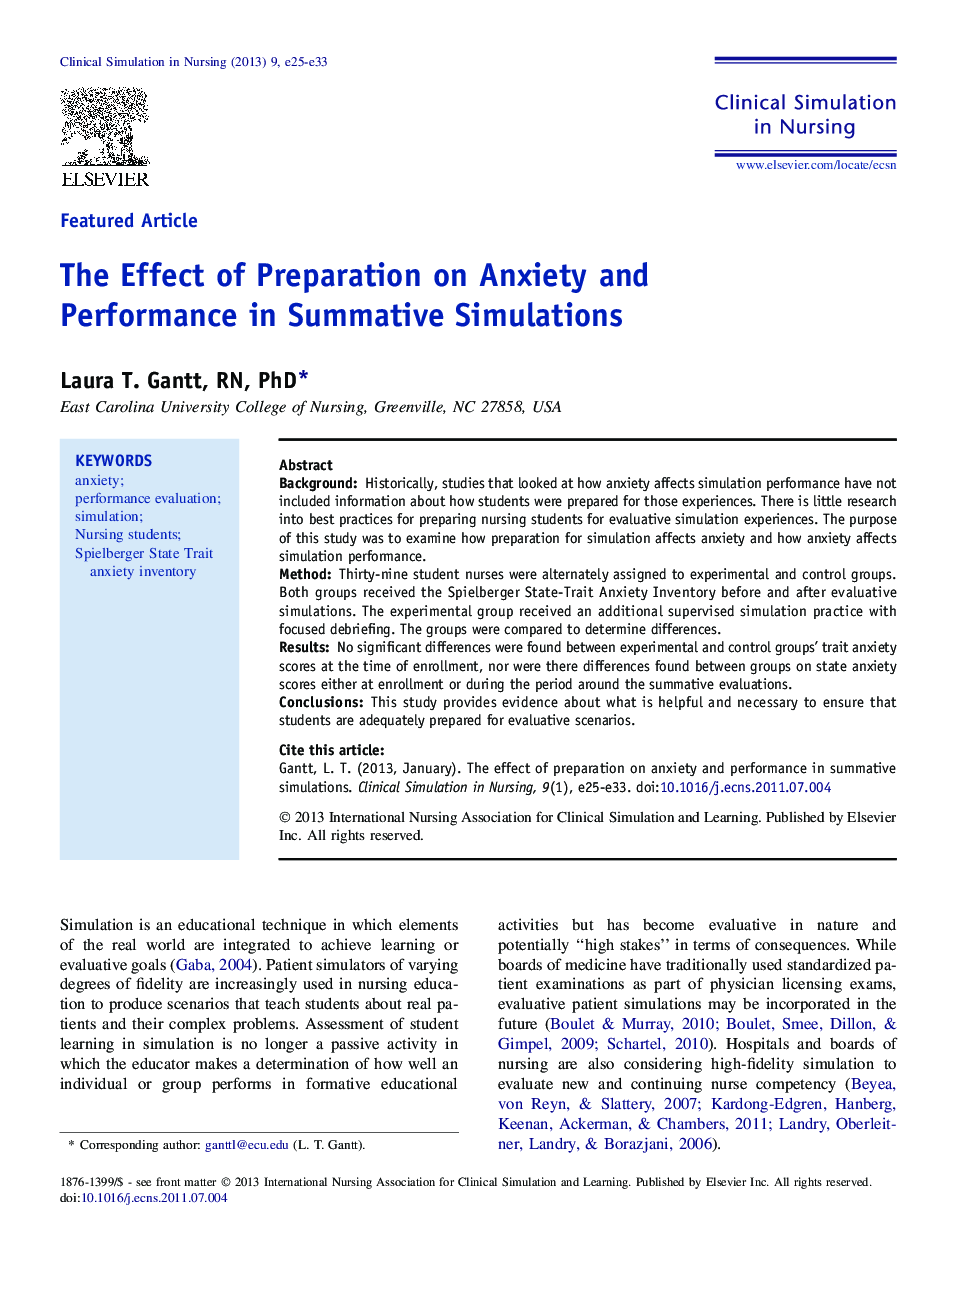 The Effect of Preparation on Anxiety and Performance in Summative Simulations